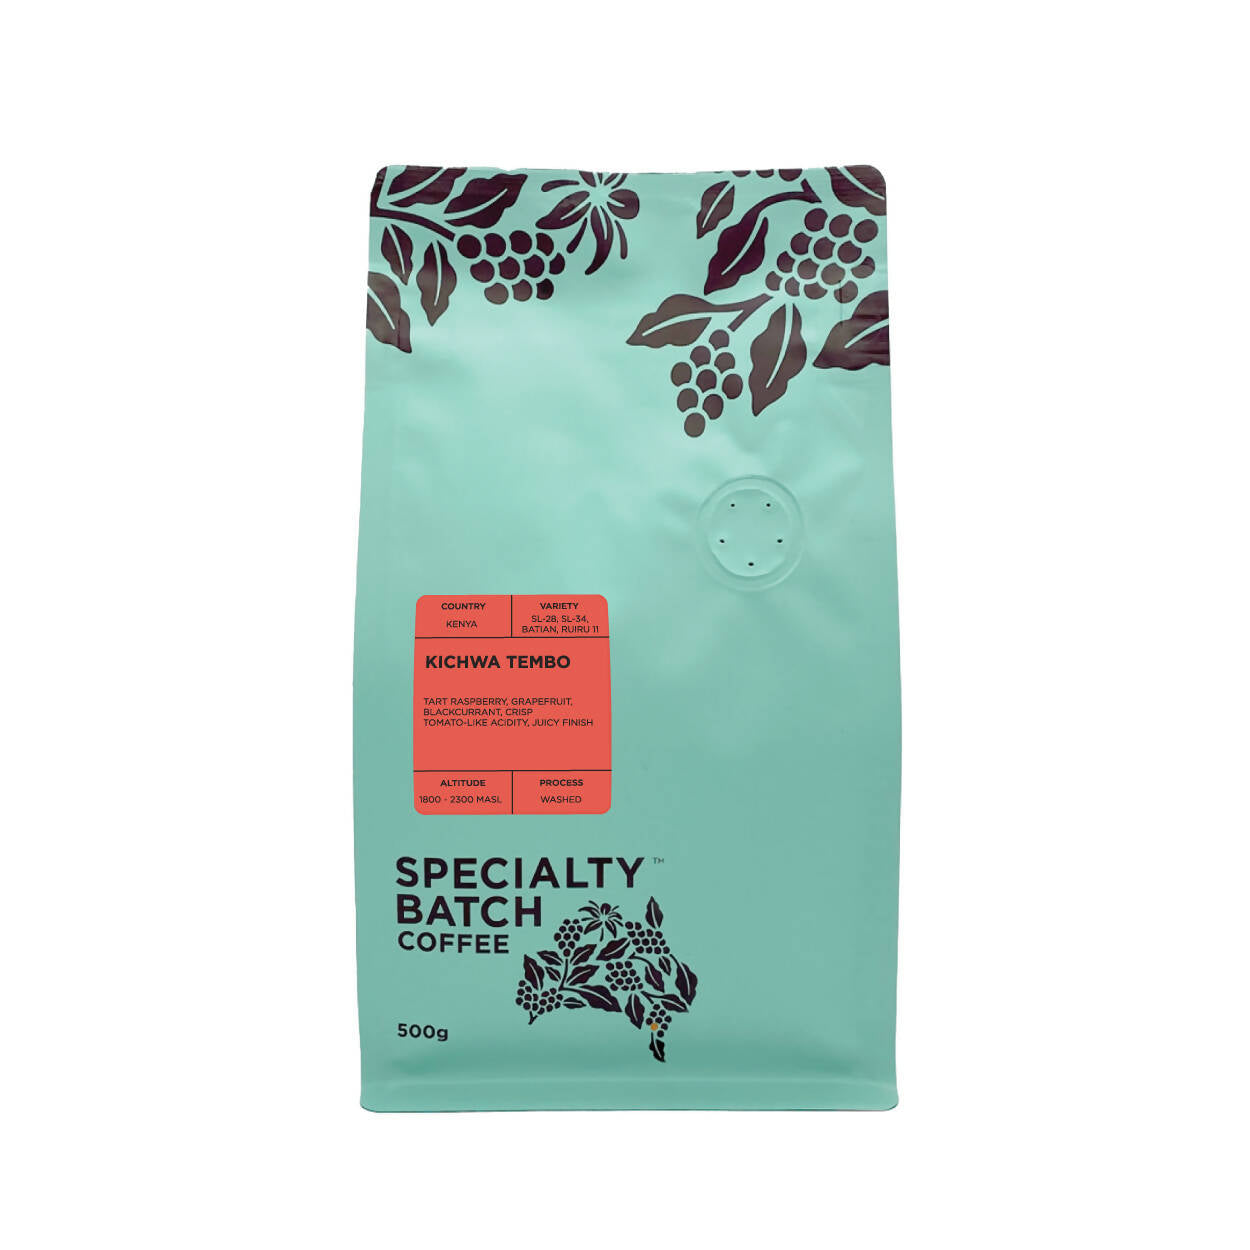 Kenya Kichwa Tembo - Filter - BeanBurds SPECIALTY BATCH COFFEE 500g ( 20 - 24 cups) / Whole Beans